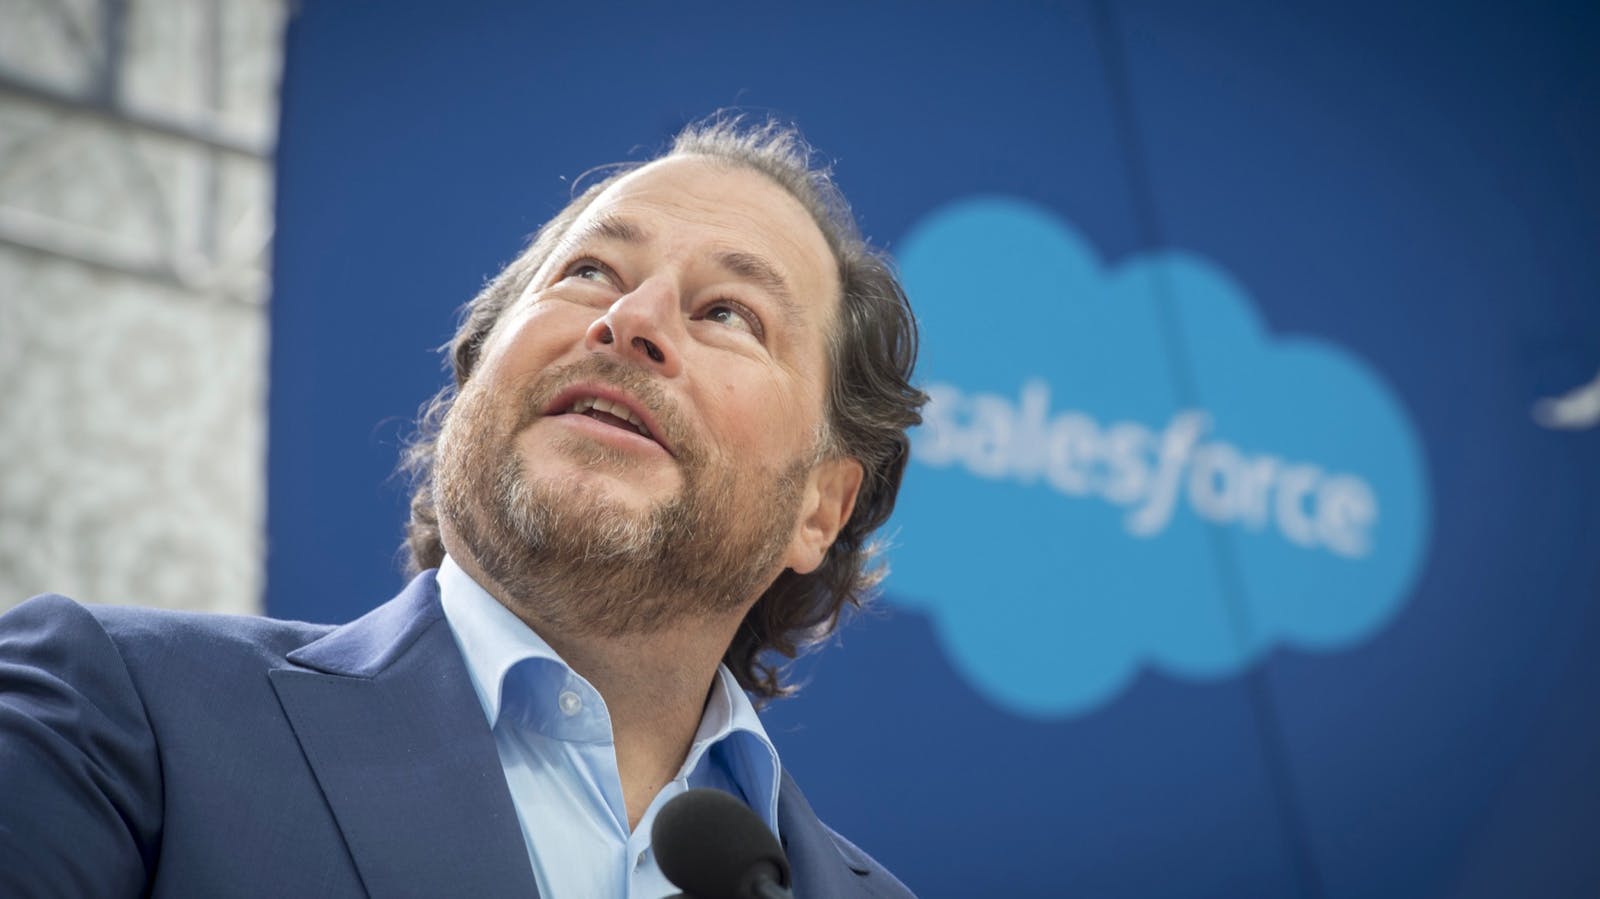 Salesforce CEO Marc Benioff. Photo by Bloomberg.